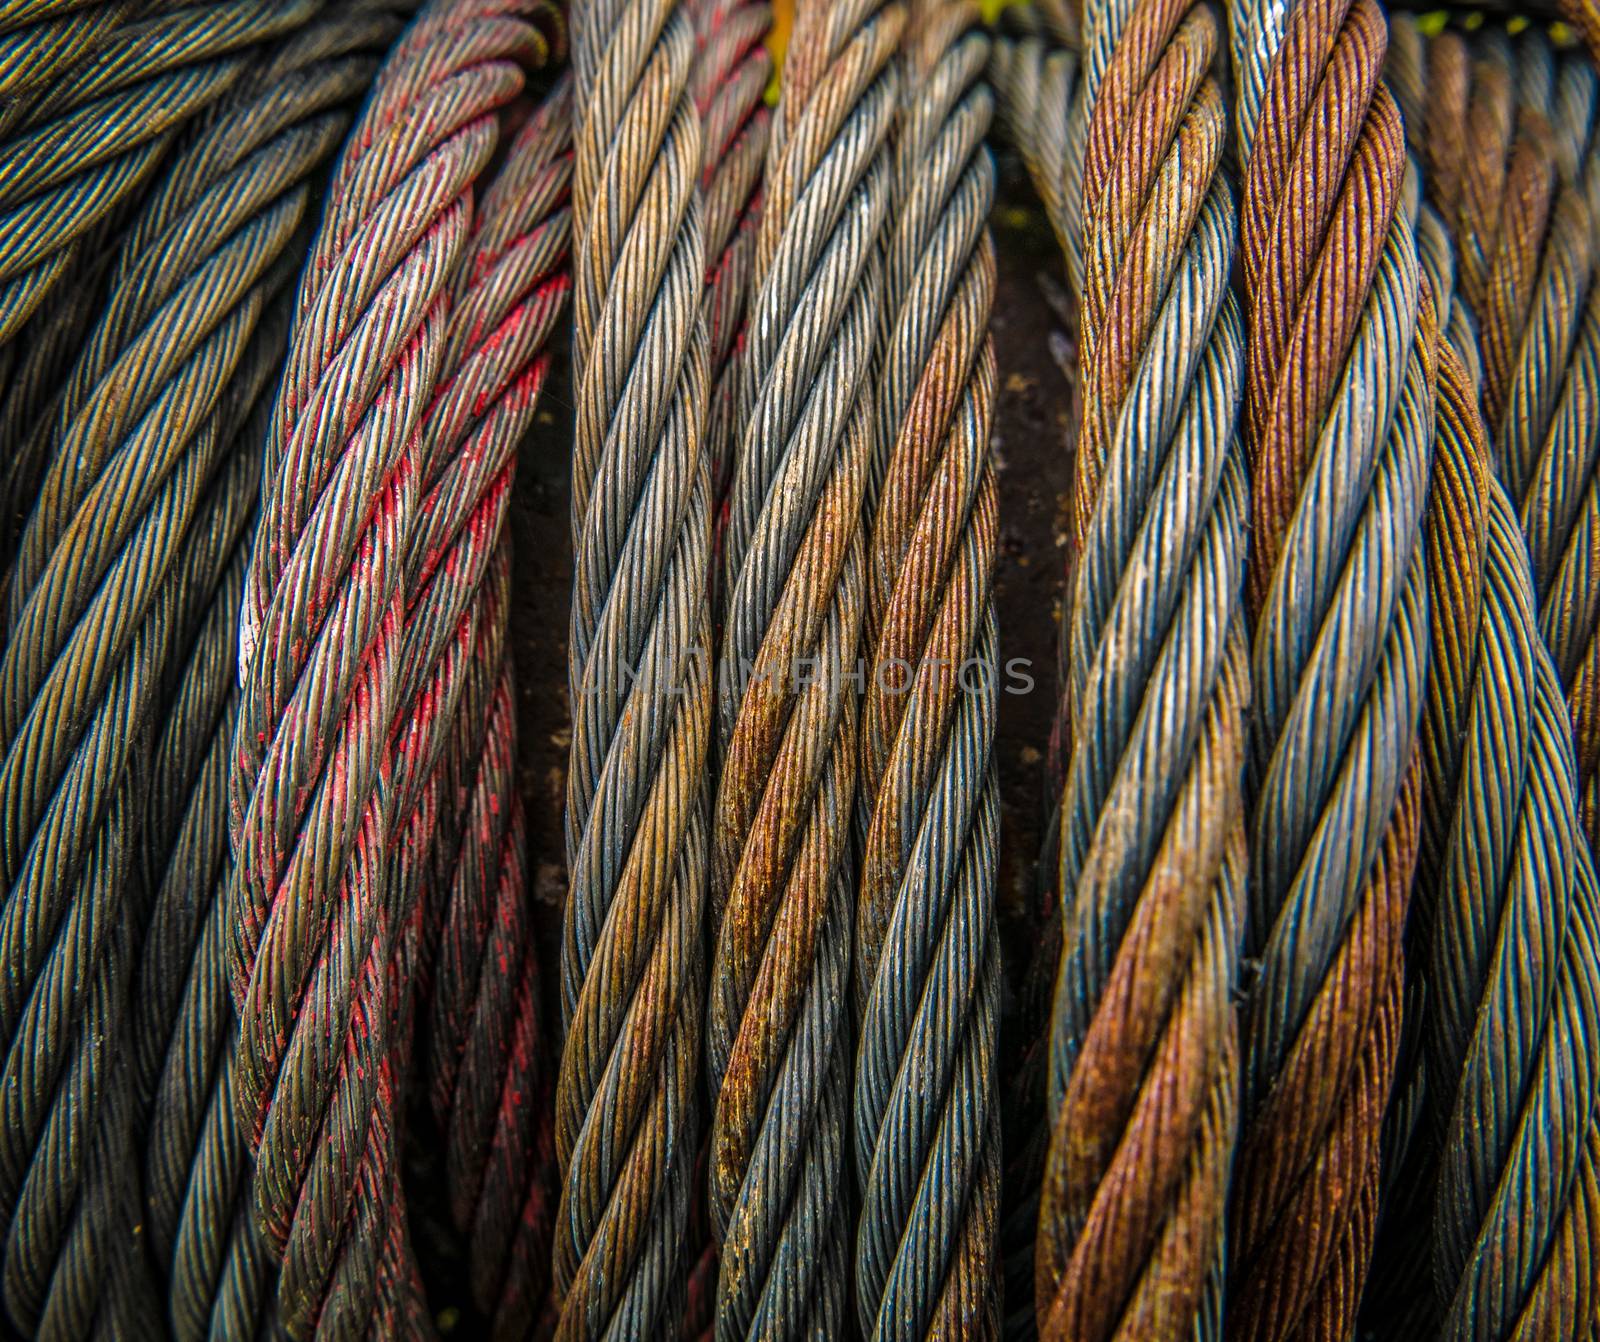 Background Texture Of Some Heavy Duty Industrial Metal Cables Or Rope